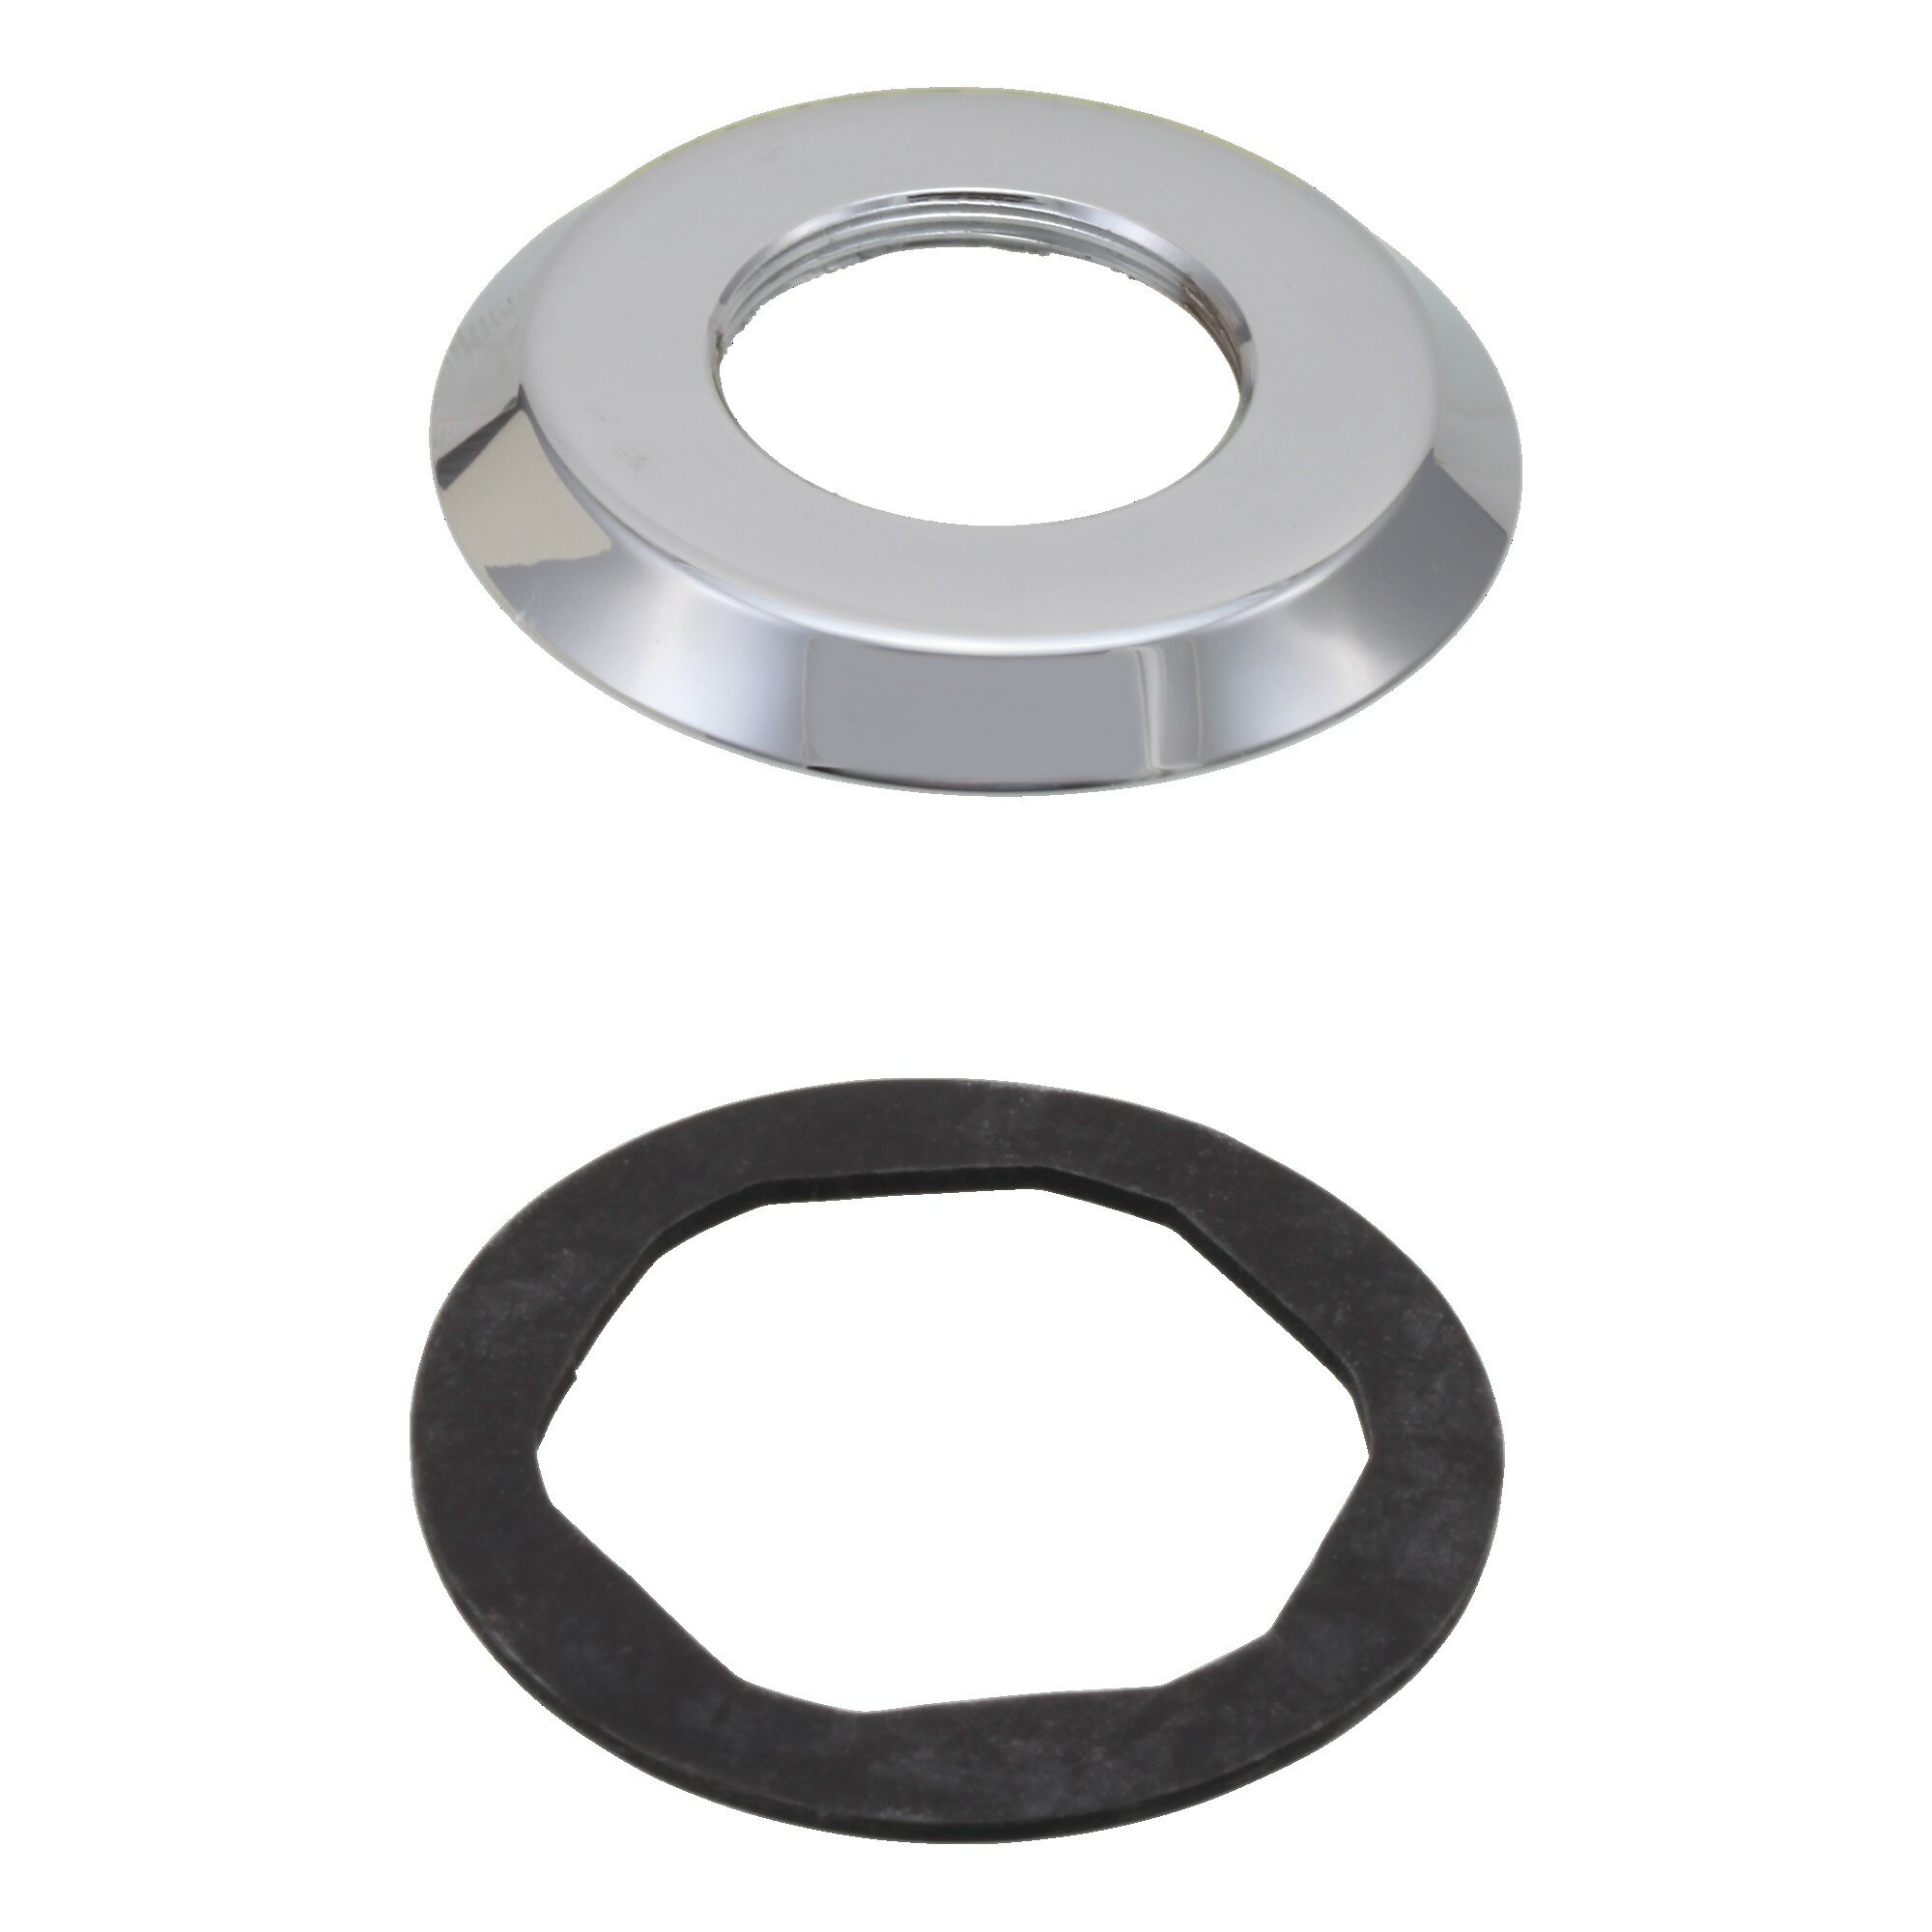 Rp18300 Delta Replacement Gasket And Base For Roman Tub Faucet